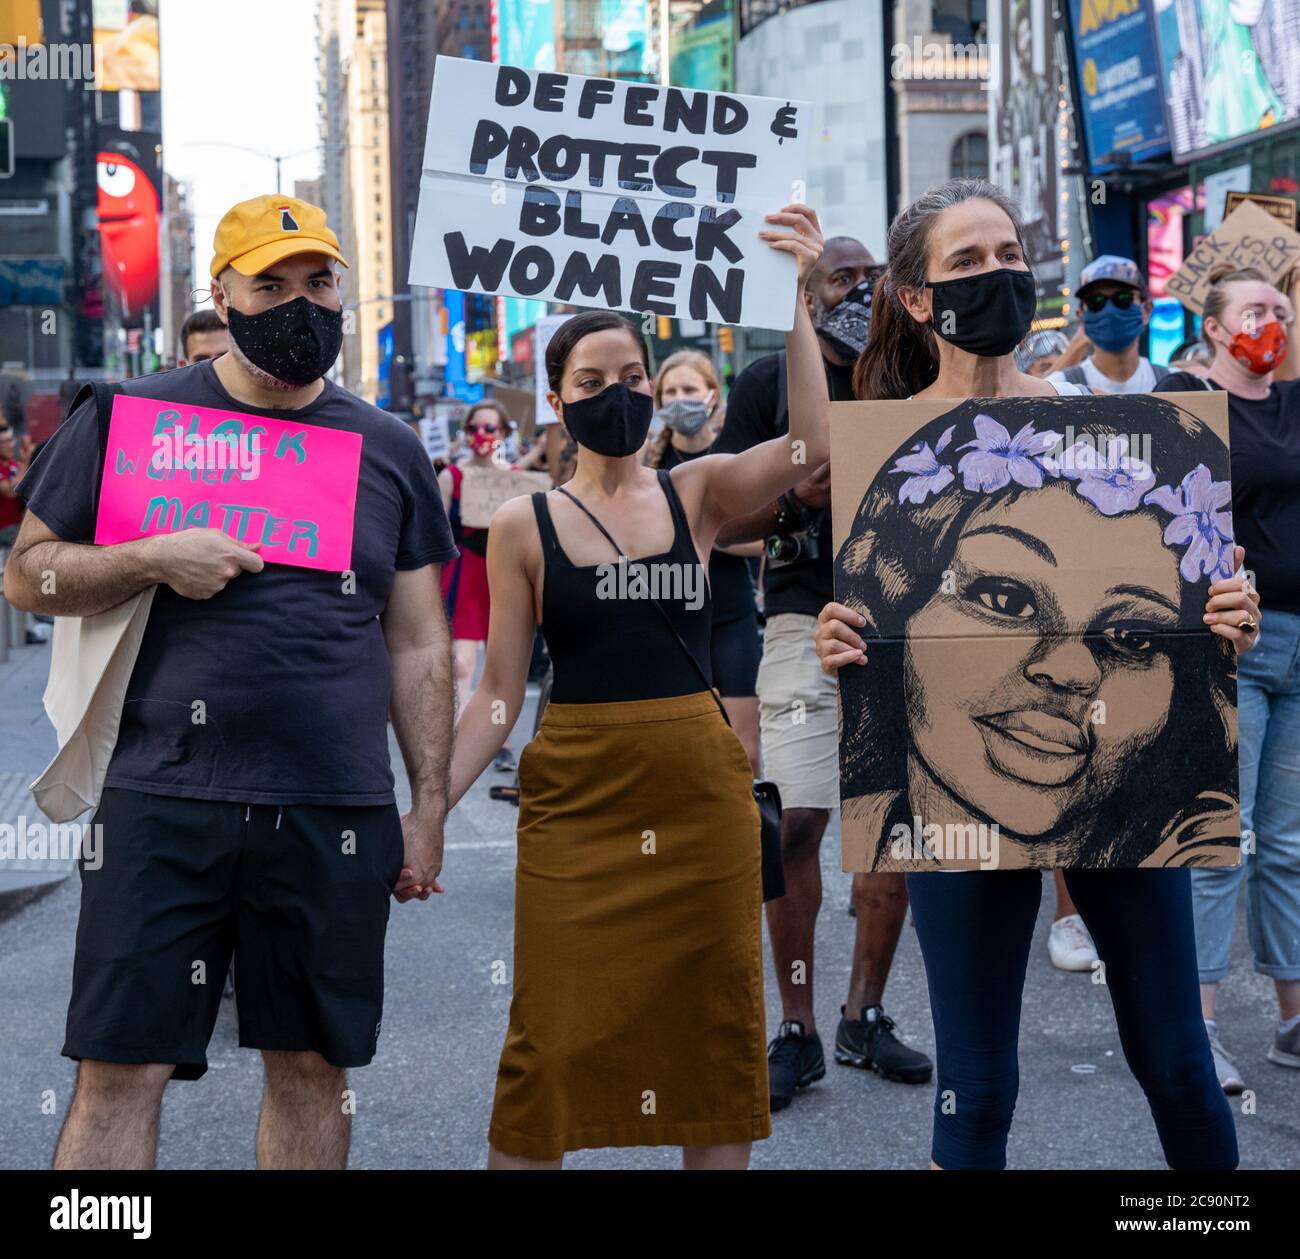 Black Womens/Womxn March Black Lives Matter Protest - New York City Defend and Protect Black Women, Breonna Taylor Drawn protest sign Stock Photo